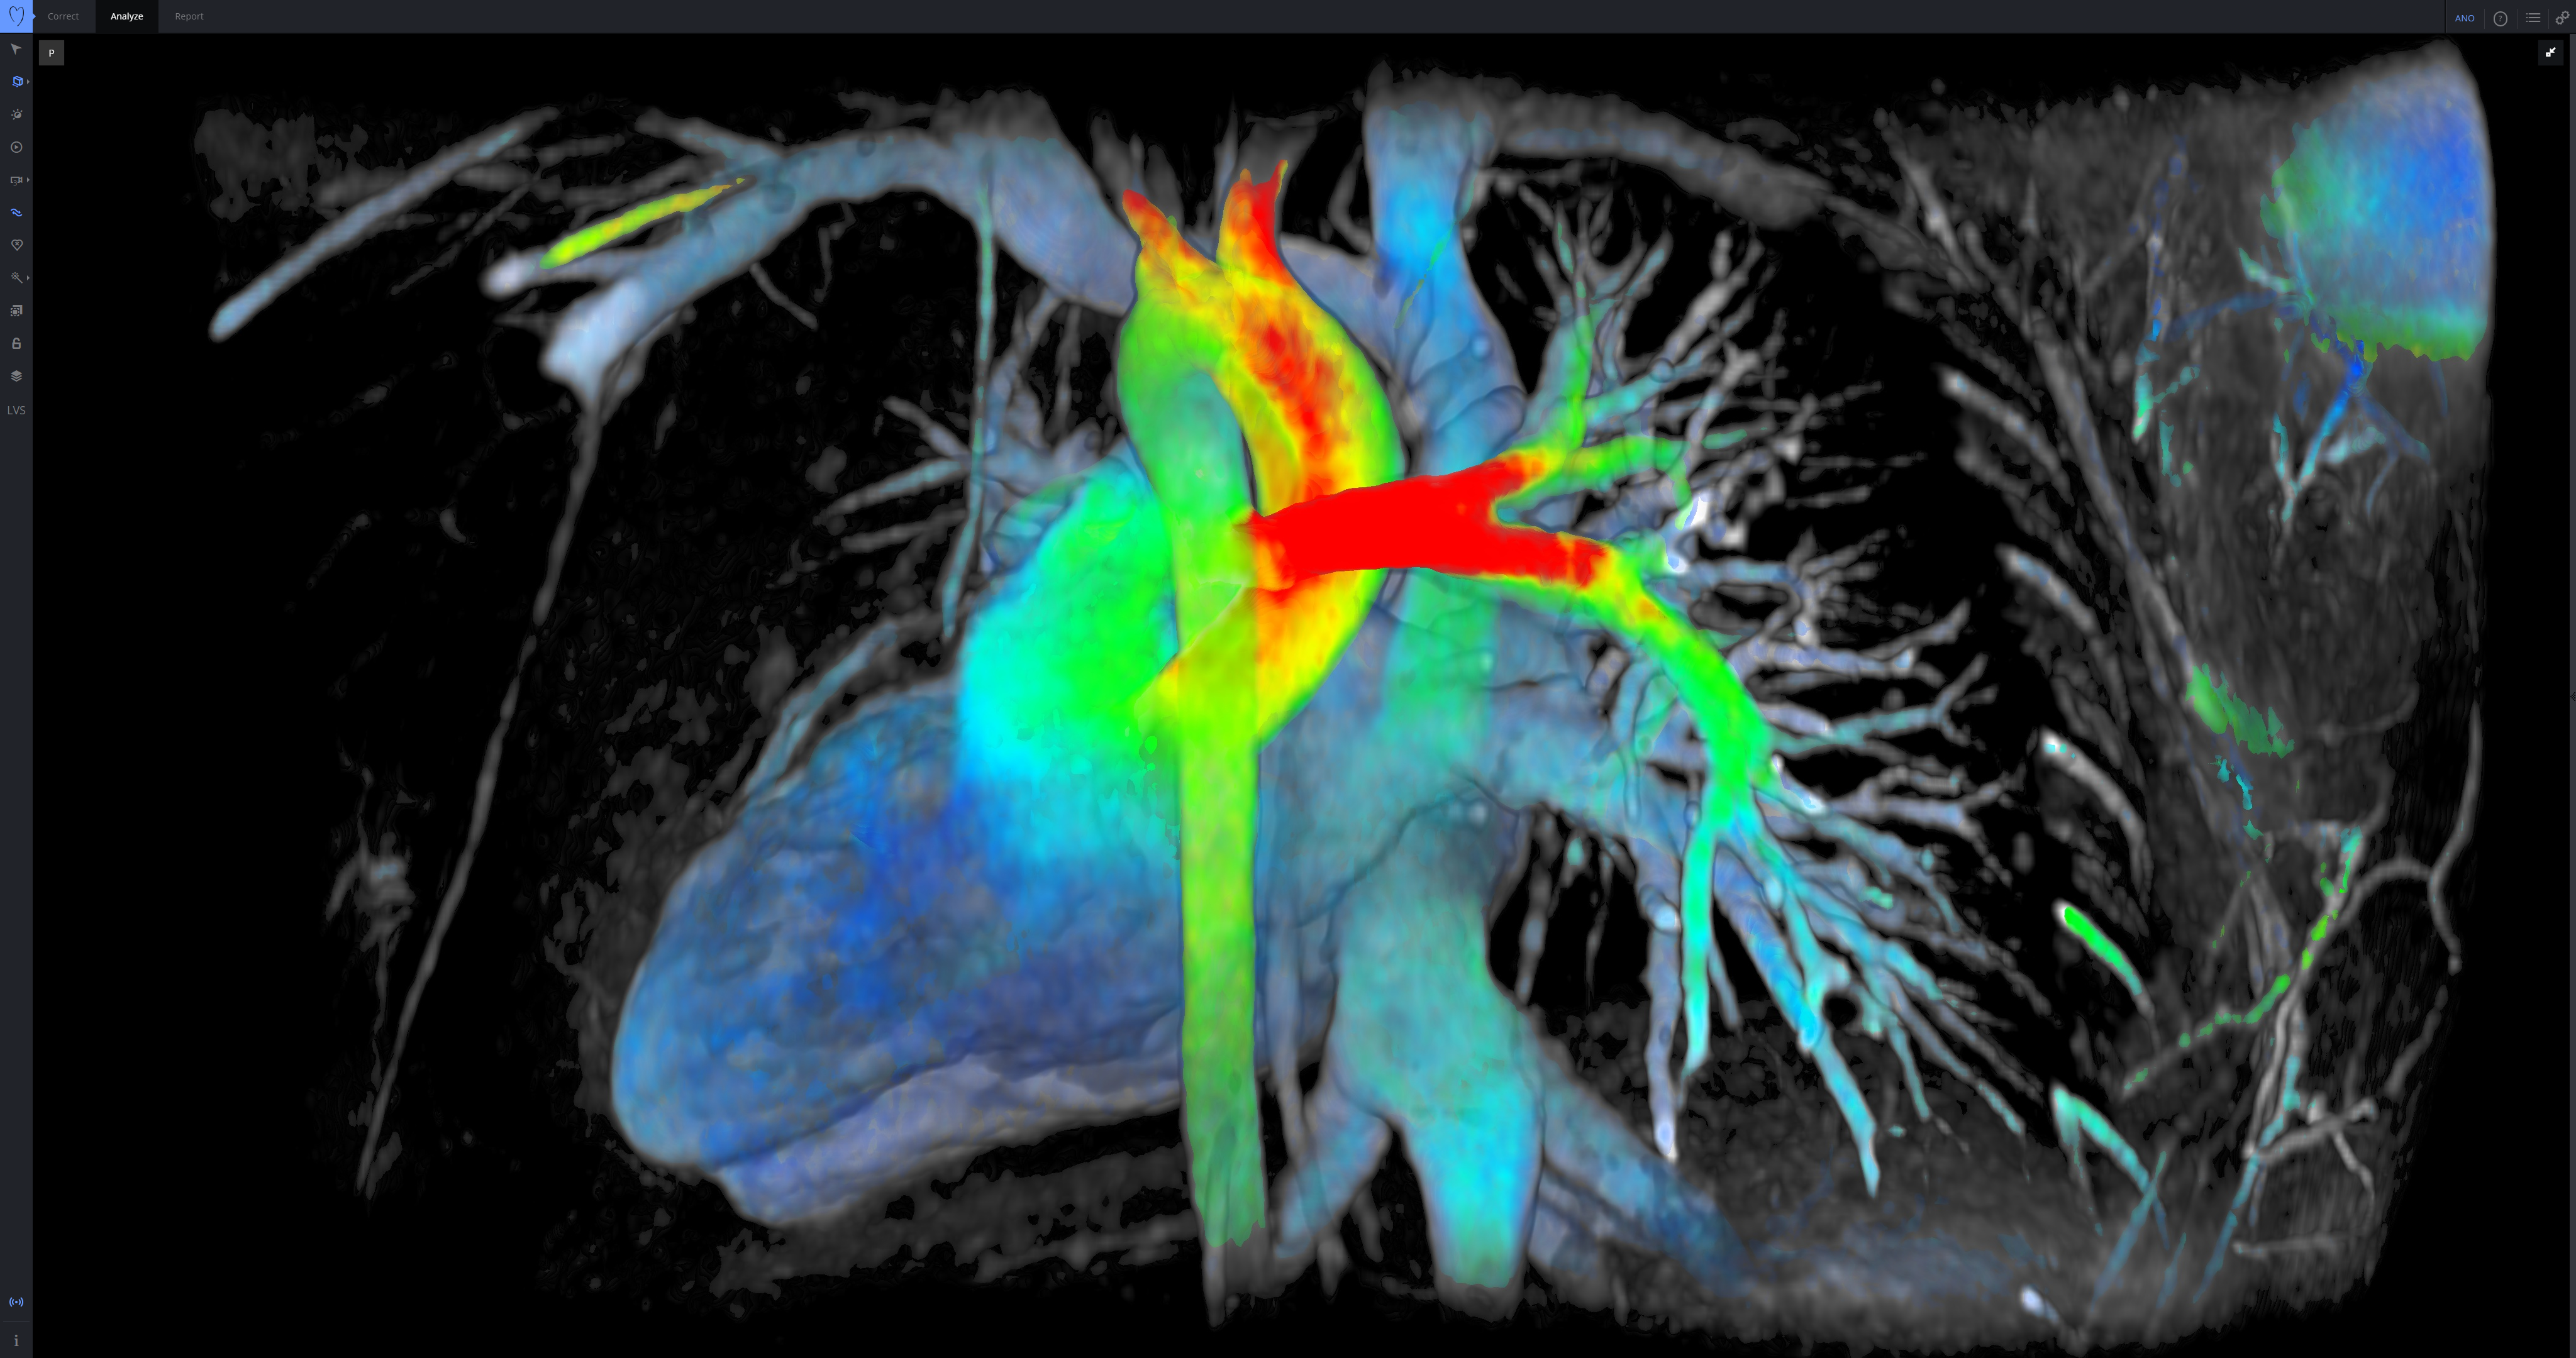 GE ViosWorks, now with Arterys software, large image datasets of the whole chest can be post processed and evaluated in real-time via cloud technology.